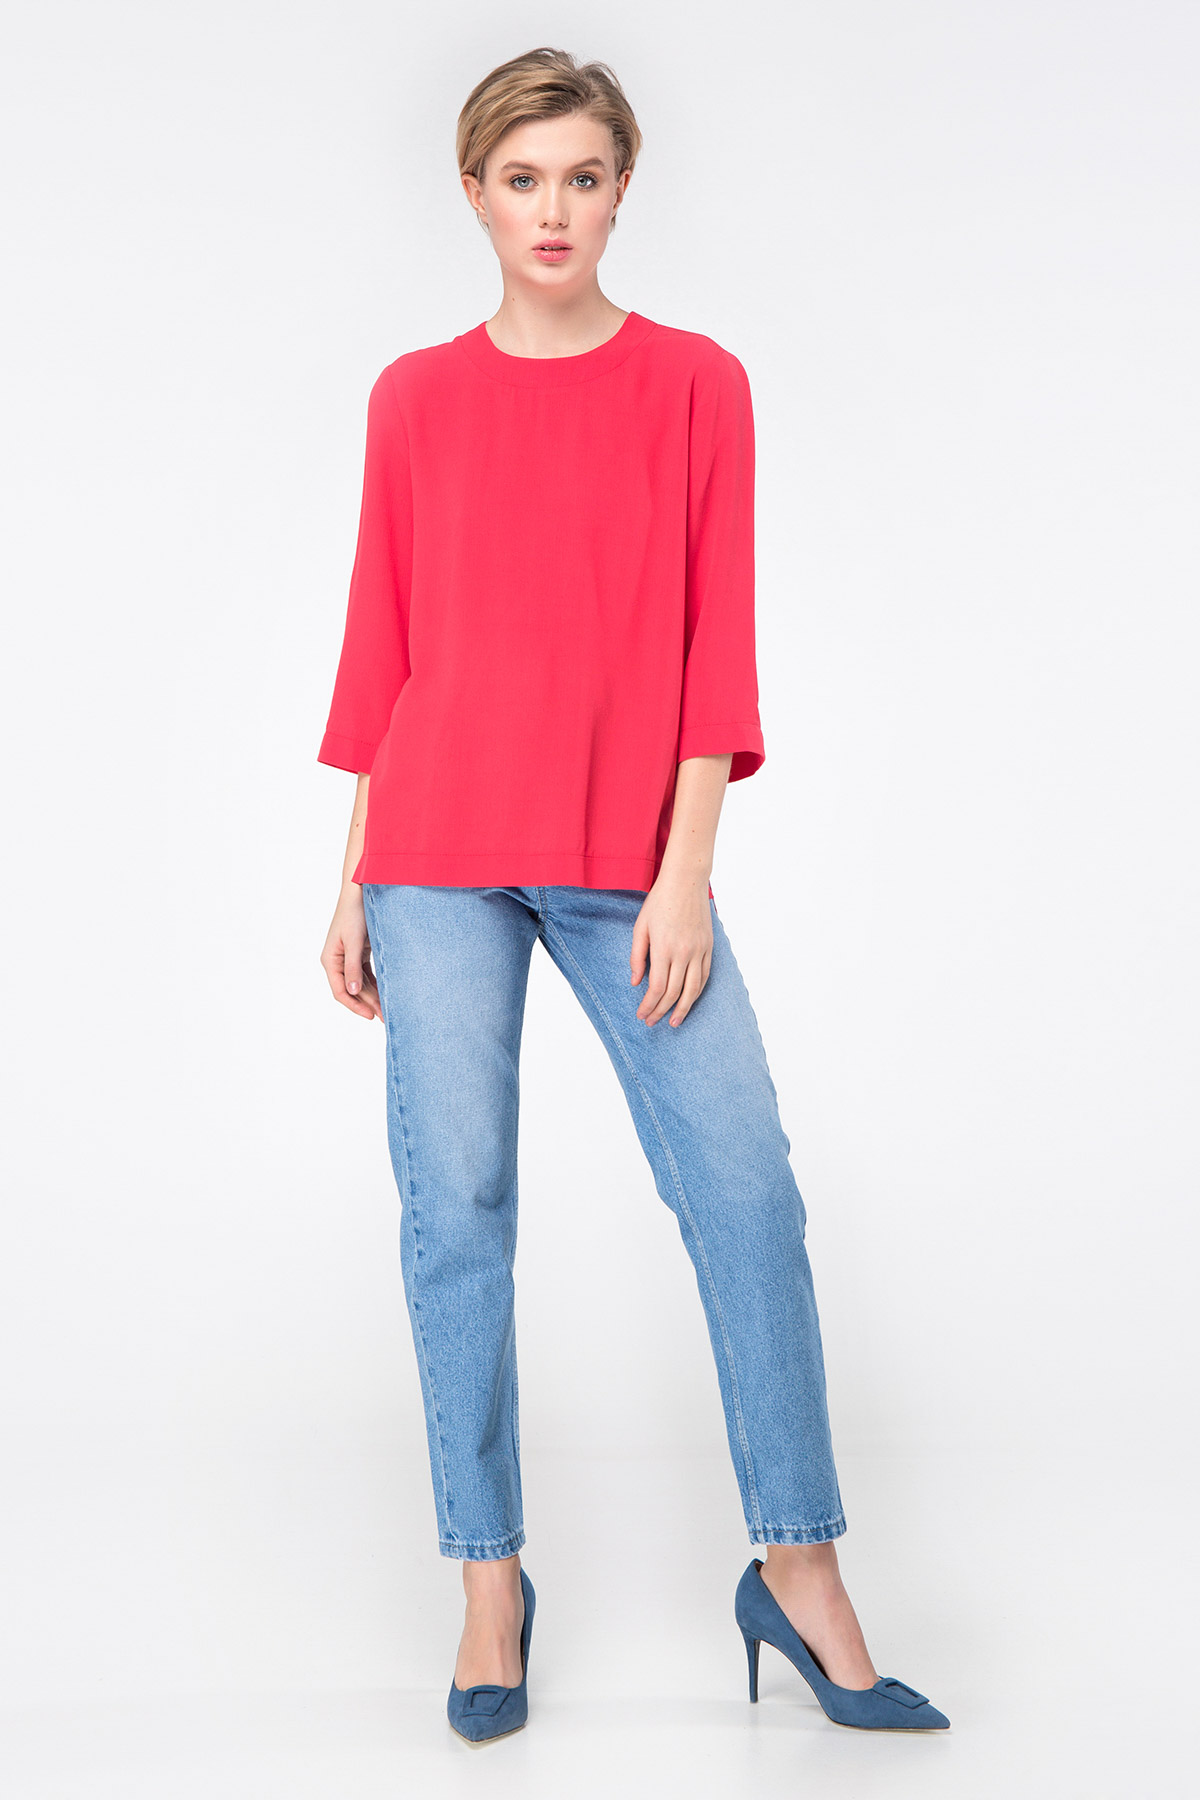 Free red top, photo 1